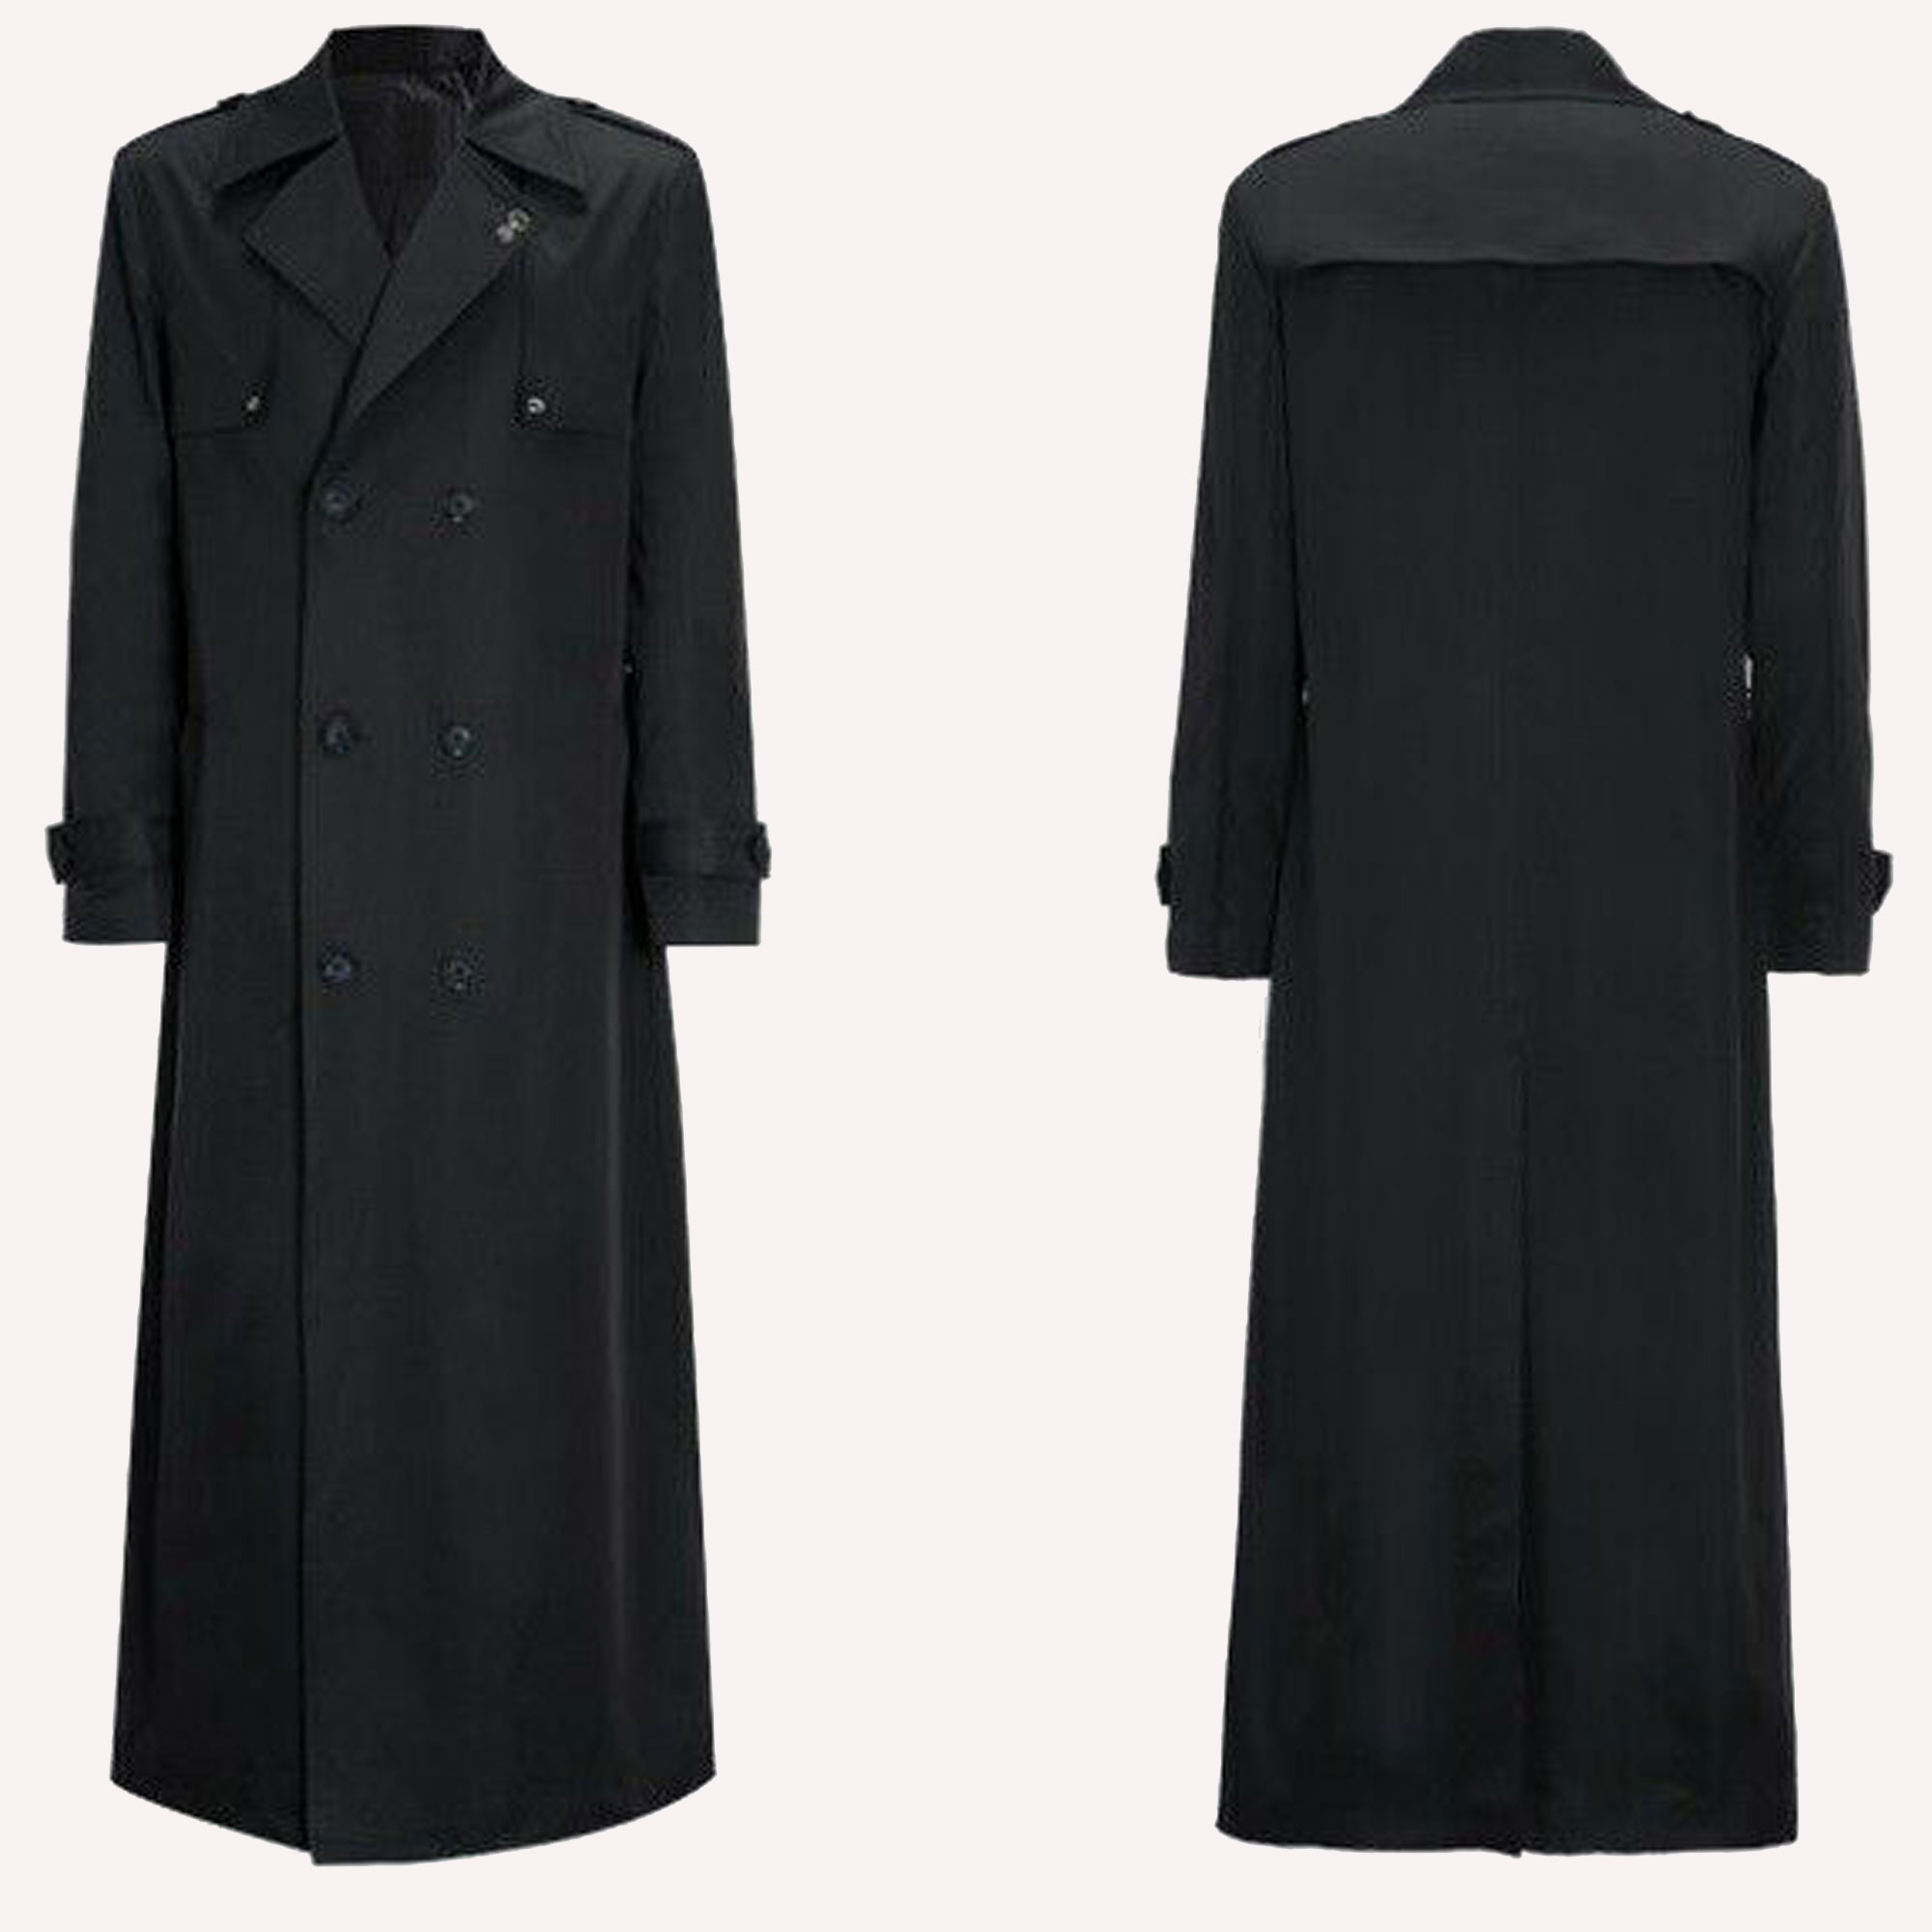 Men's Western Style Business Long Trench coat